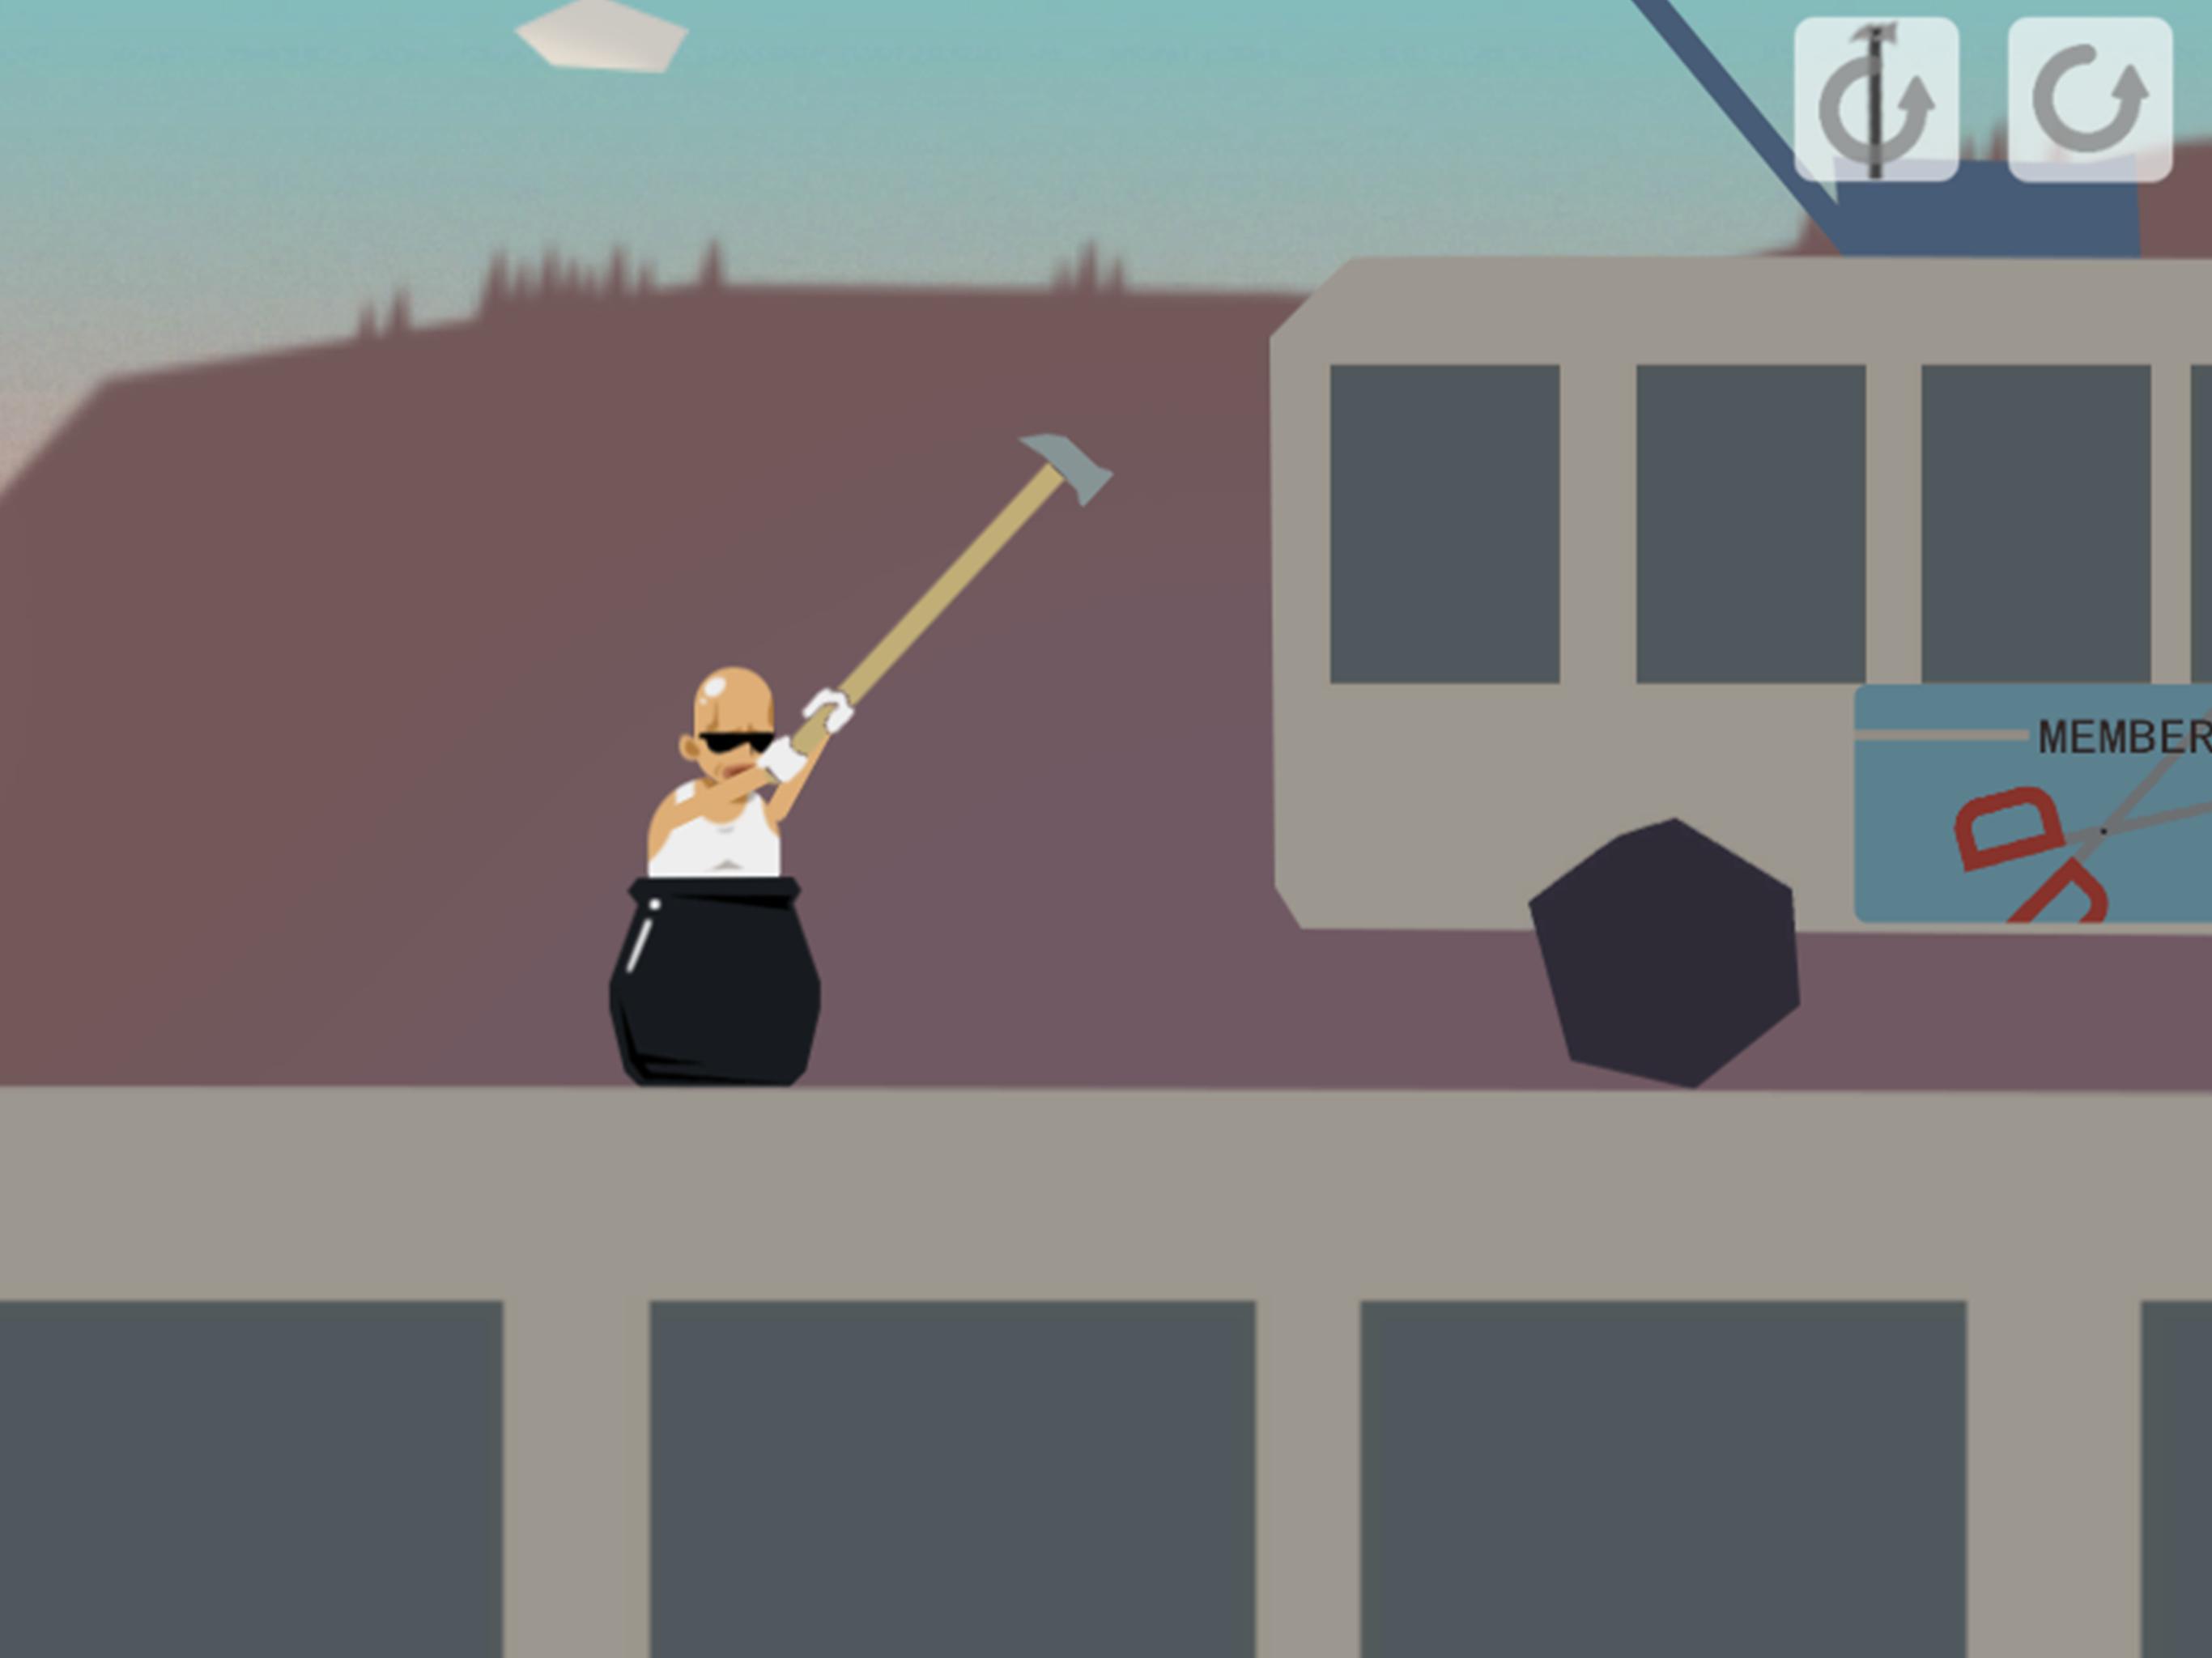 Game get help. Геттинг овер ИТ. Getting over it игра для Android. Getting over it Скриншот. Моды для getting over it.